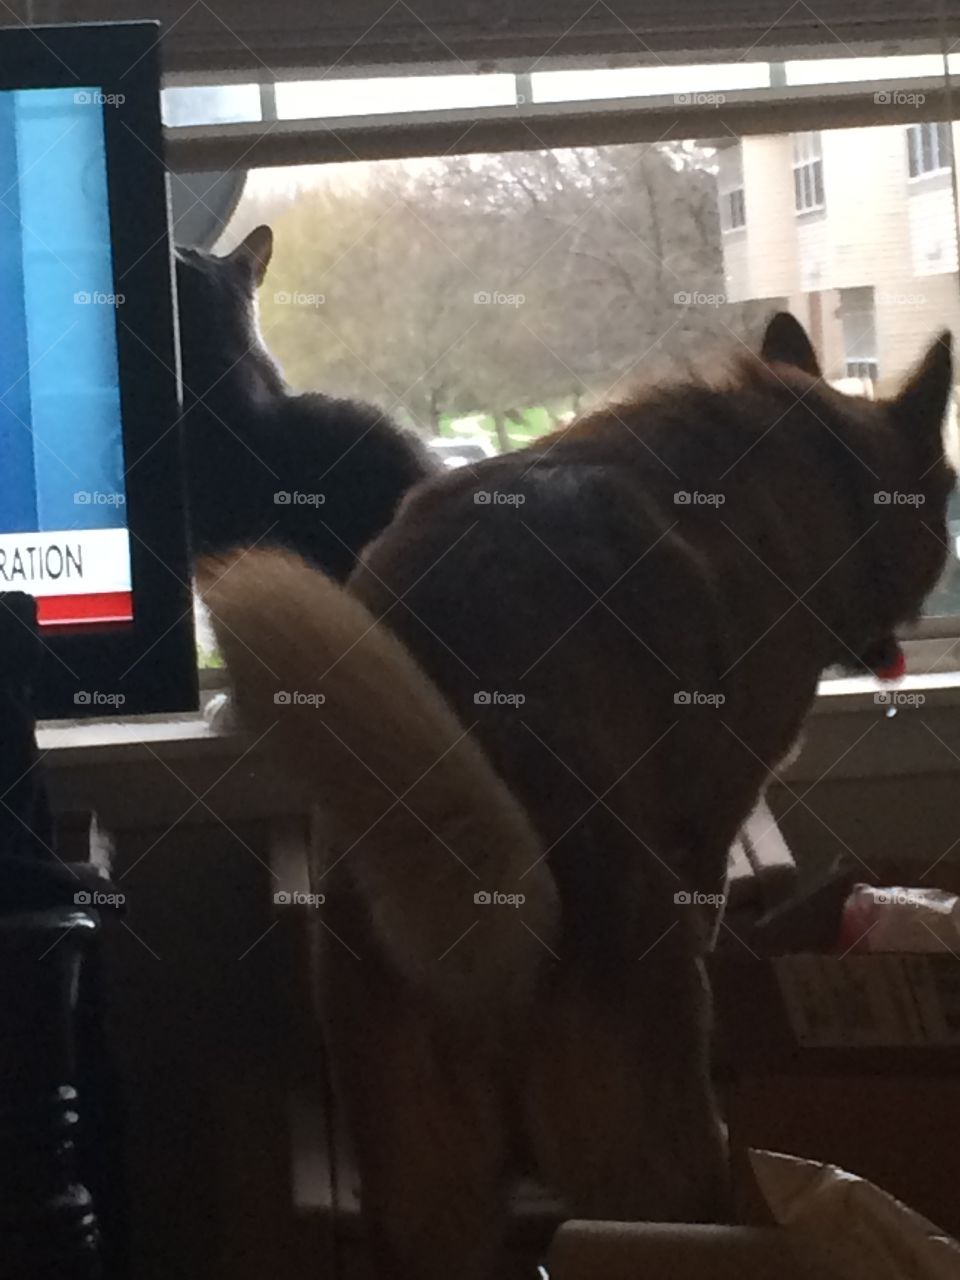 My dog & cat sharing the window because they are "busy bodies" 